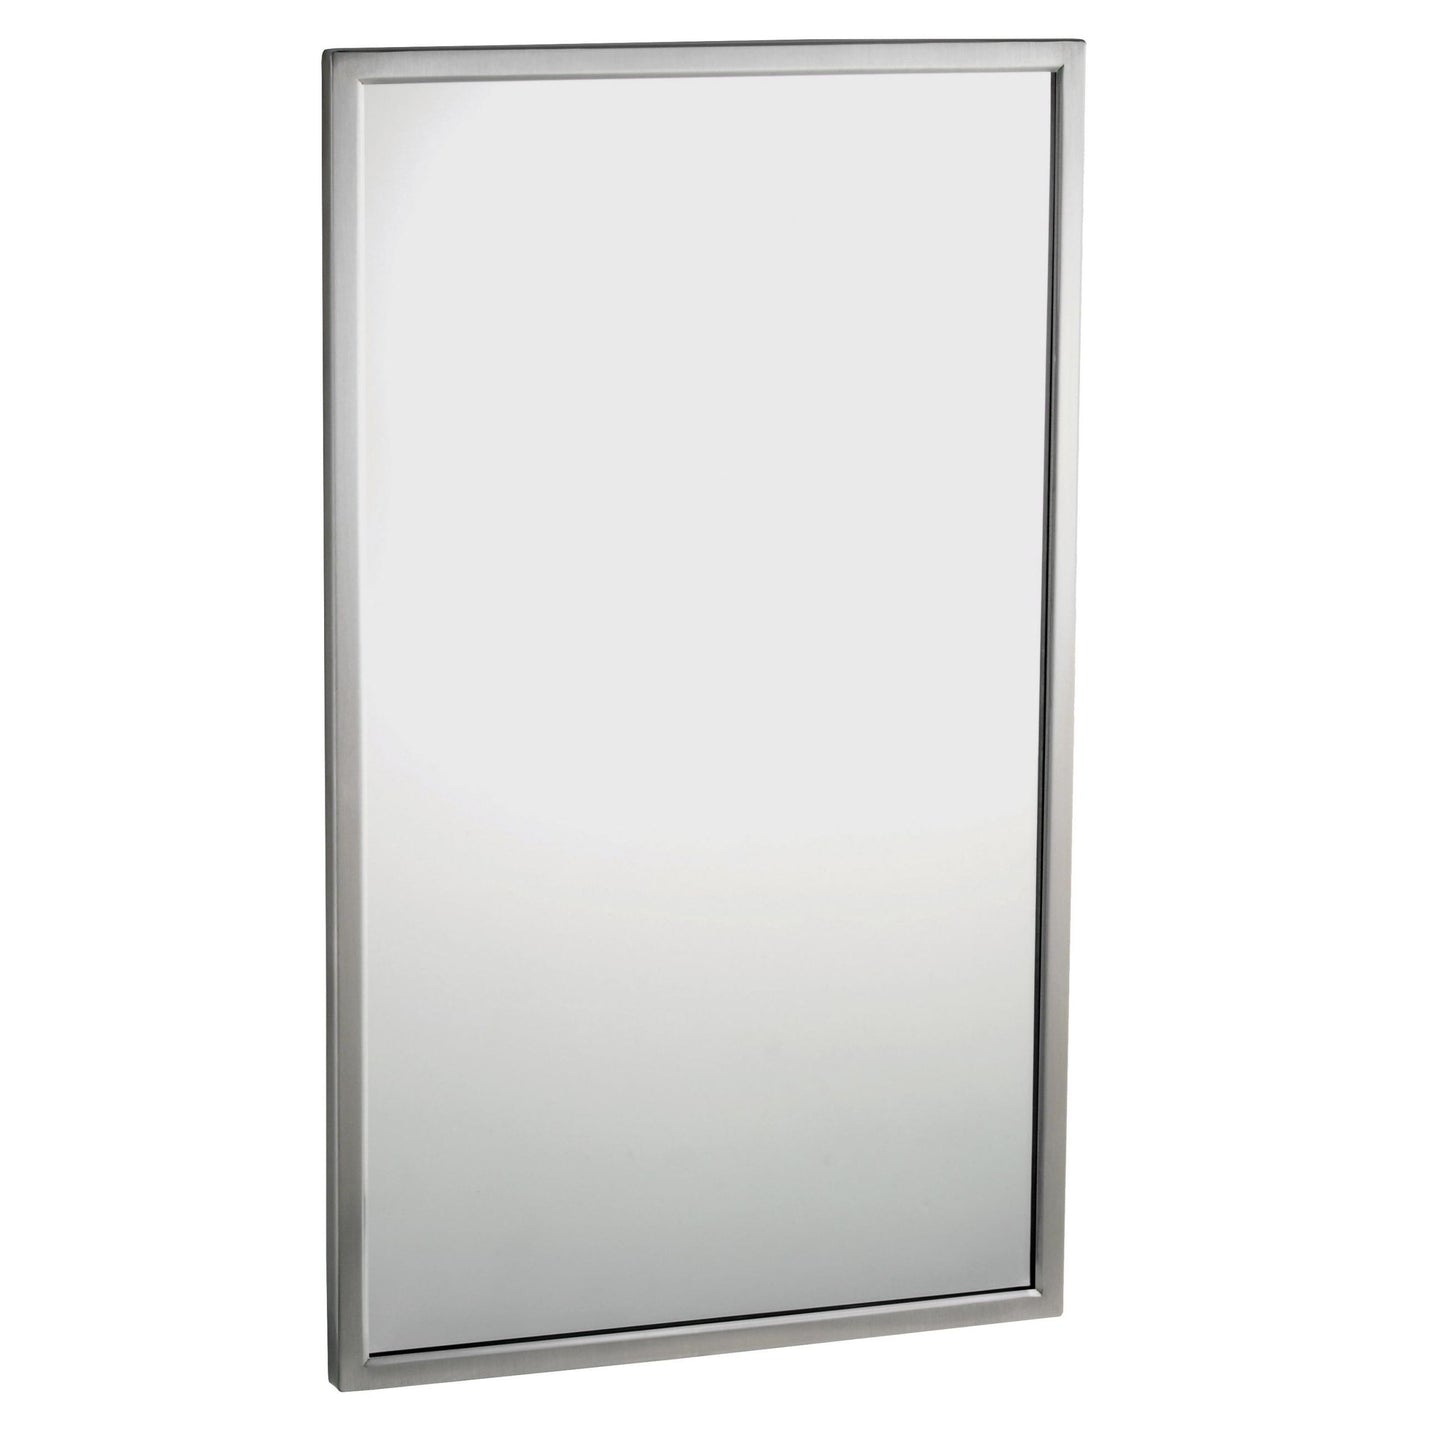 Bobrick 2908 1830 - 18" x 30" Welded Frame Tempered Glass Mirror in Polished Stainless Steel